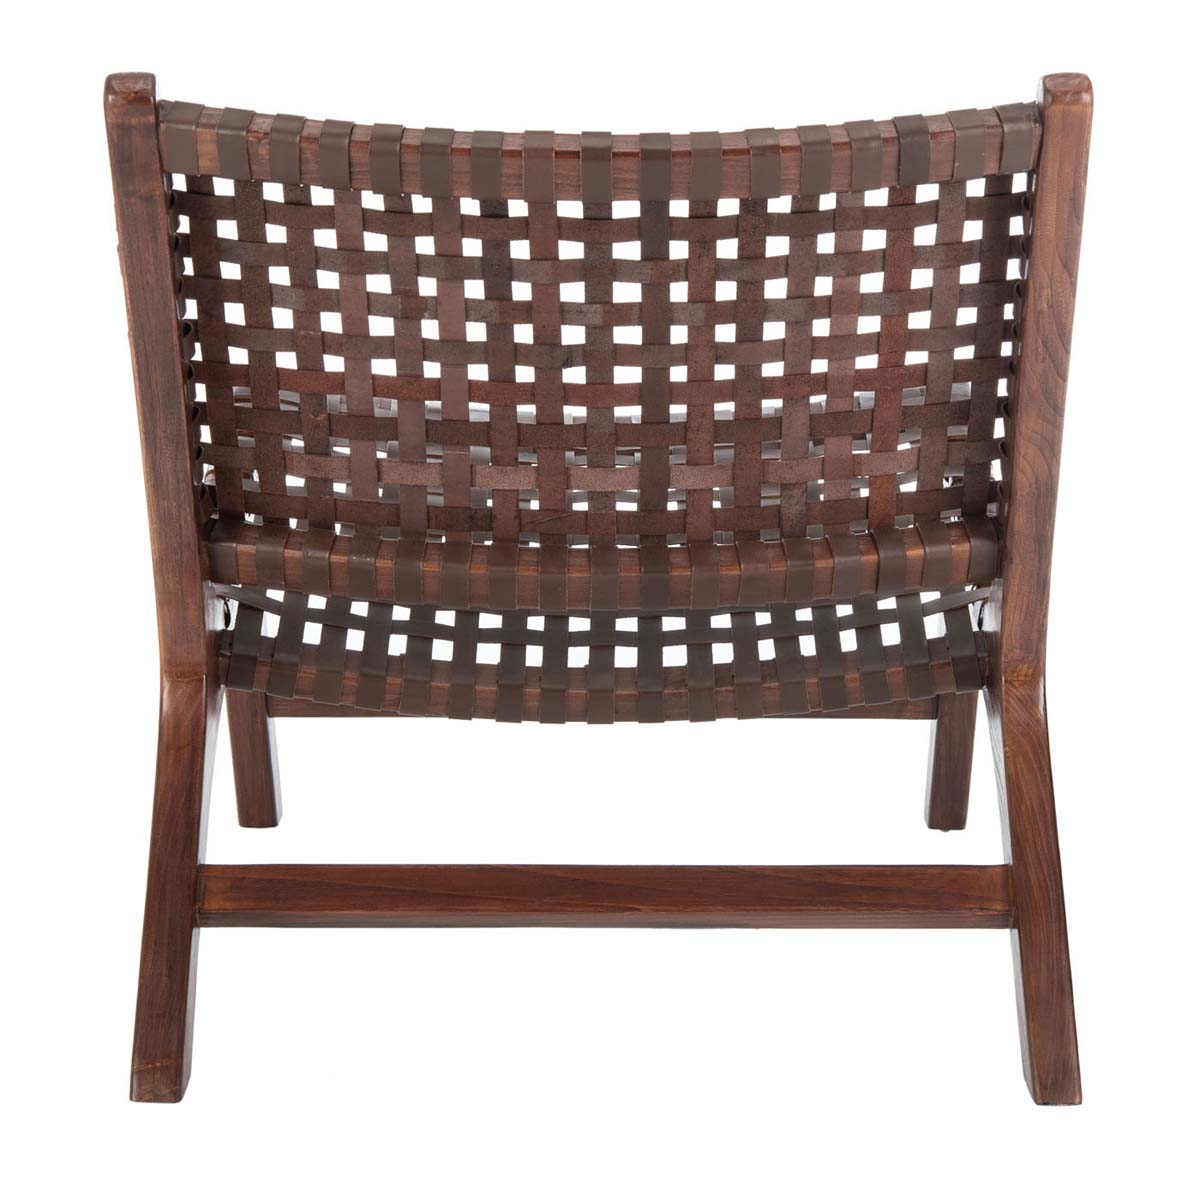 Safavieh Luna Leather Woven Accent Chair , ACH1002 - Brown Leather/Brown